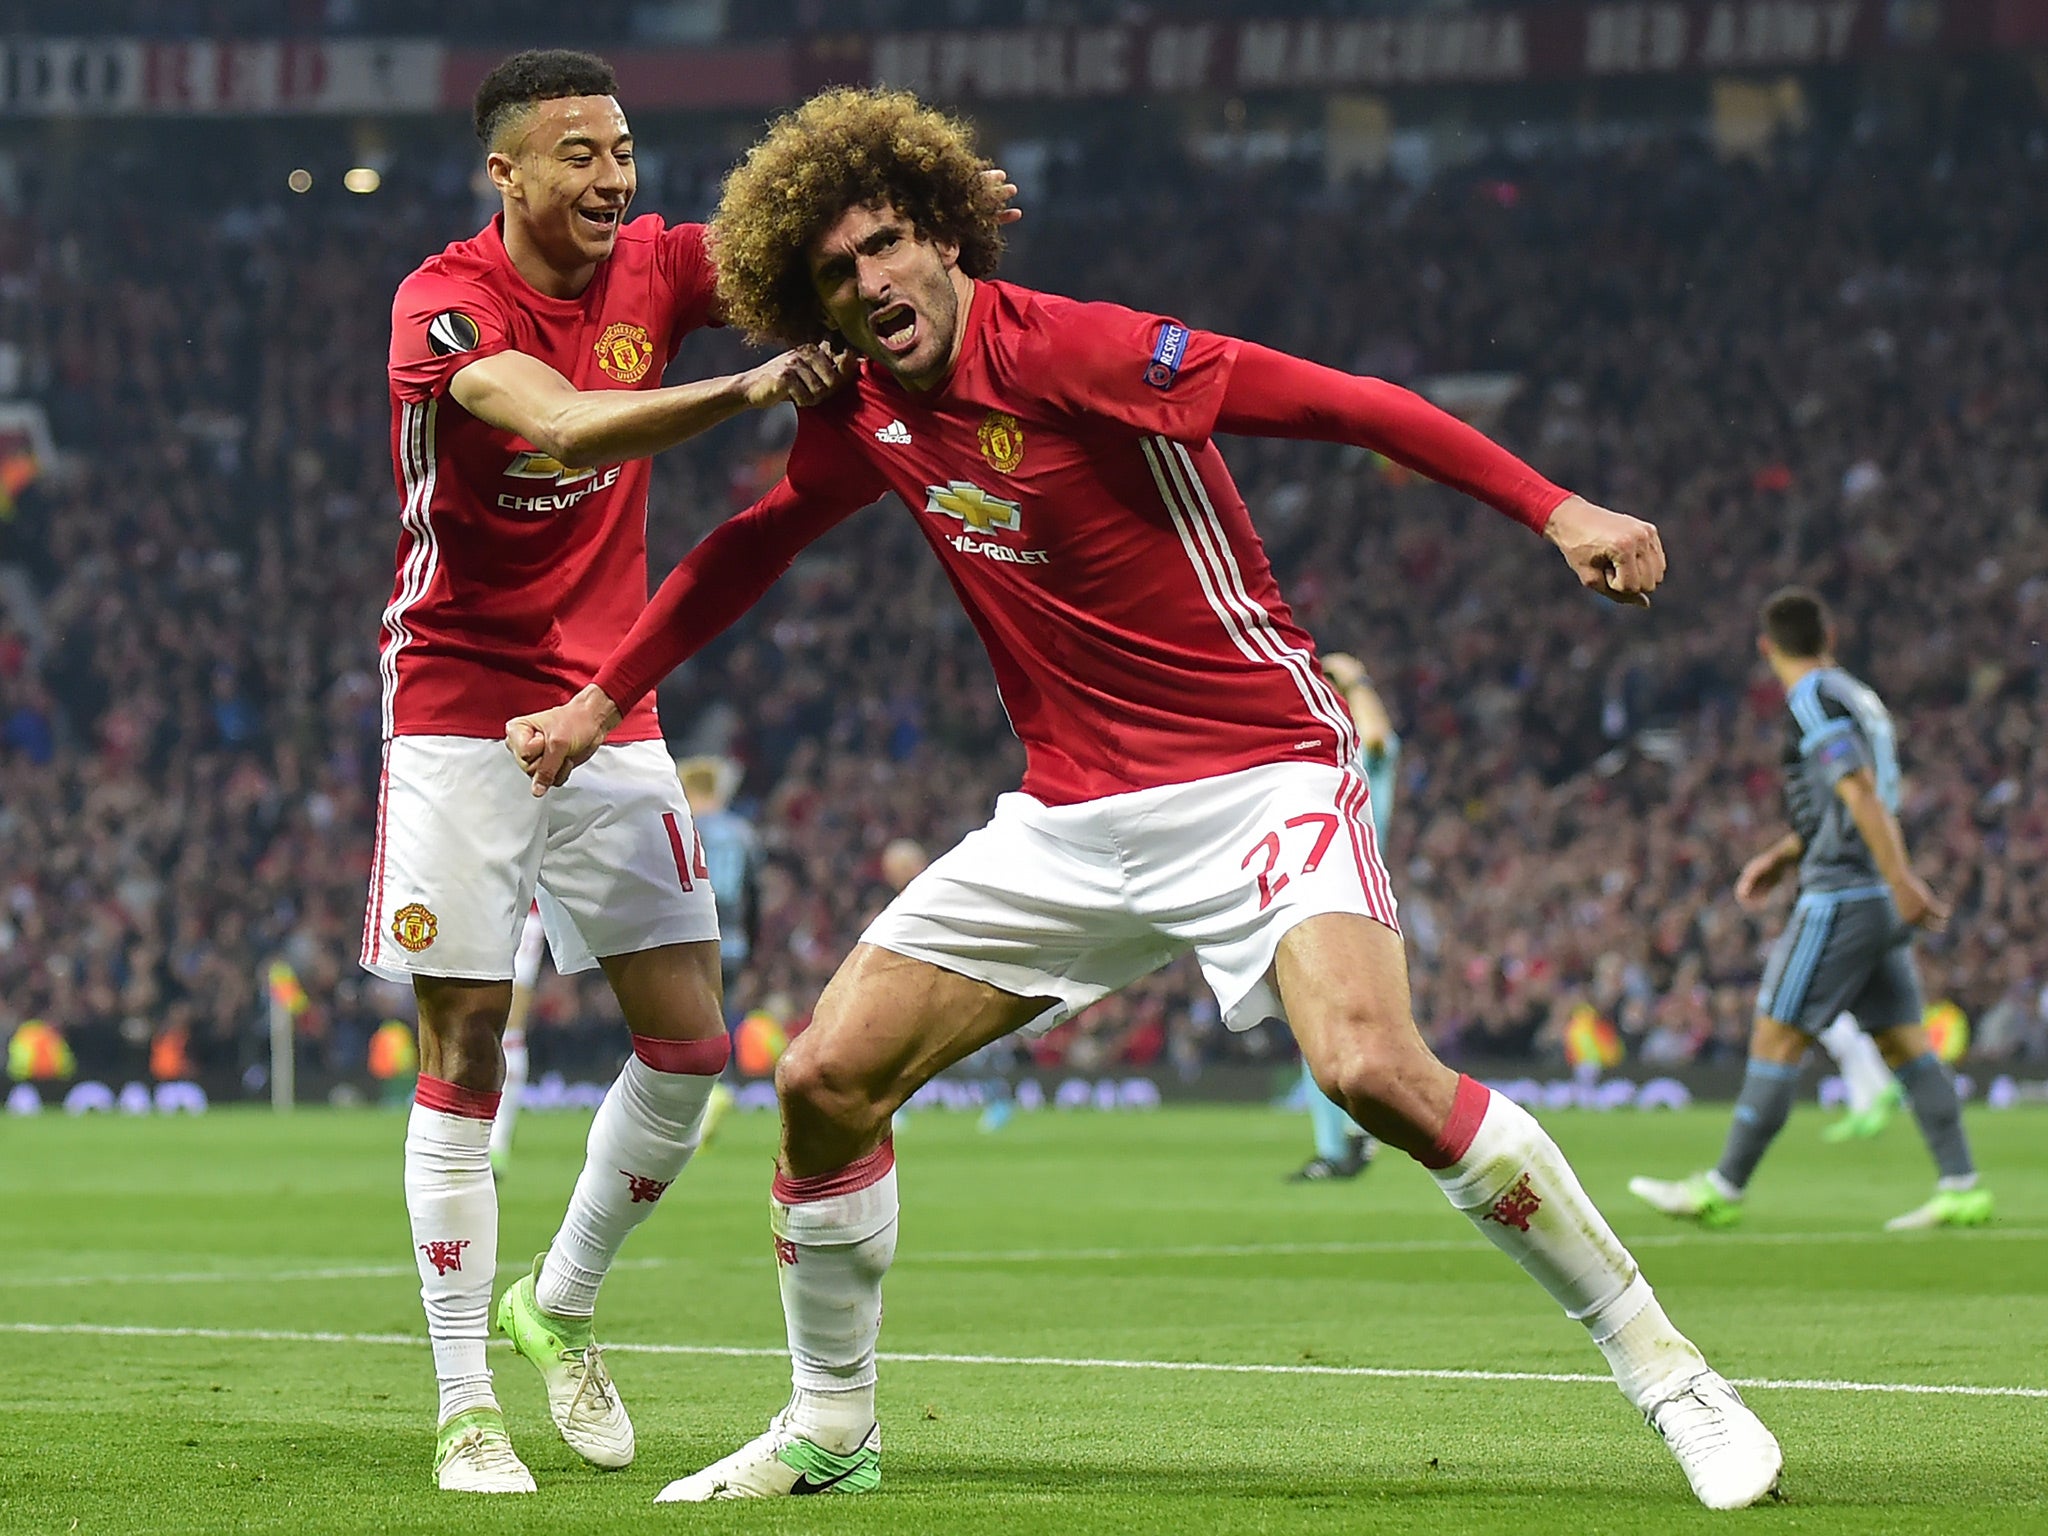 Marouane Fellaini doubled Manchester United's advantage with a first-half header